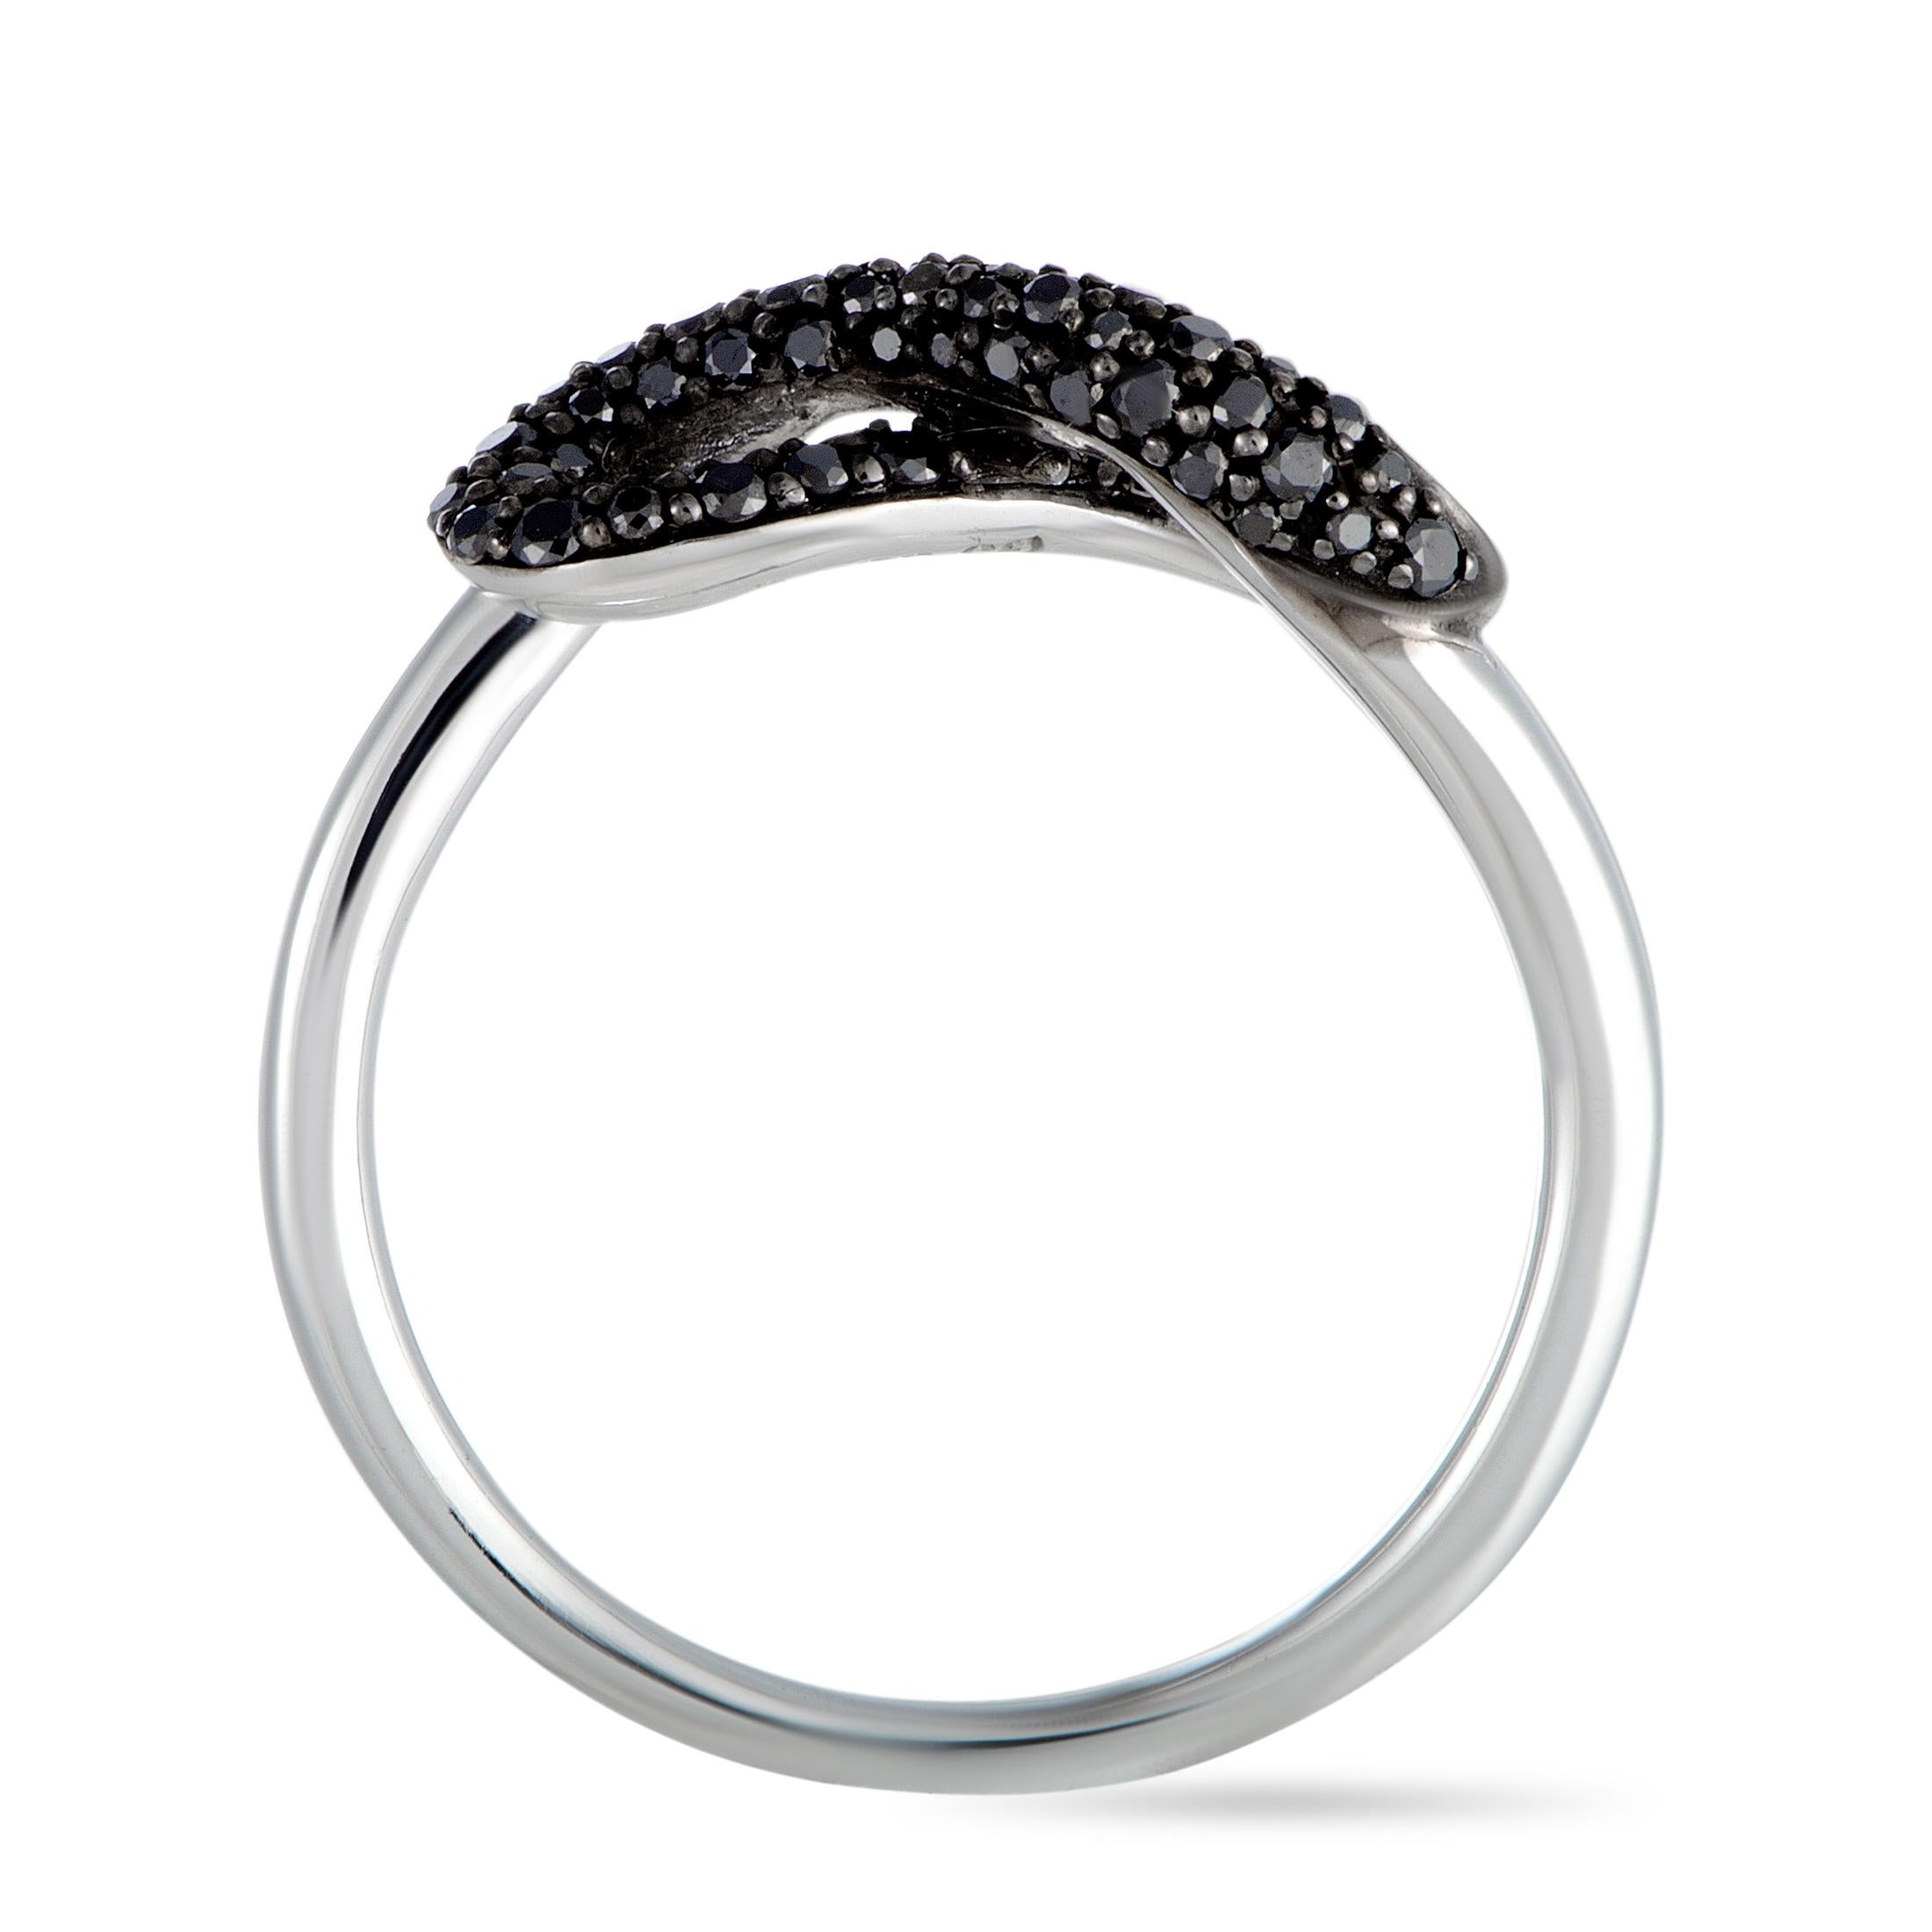 This Georg Jensen ring is made out of silver and black diamonds that amount to 0.26 carats. The ring weighs 2 grams, boasting band thickness of 2 mm and top height of 5 mm, while top dimensions measure 5 by 15 mm.

Offered in brand new condition,